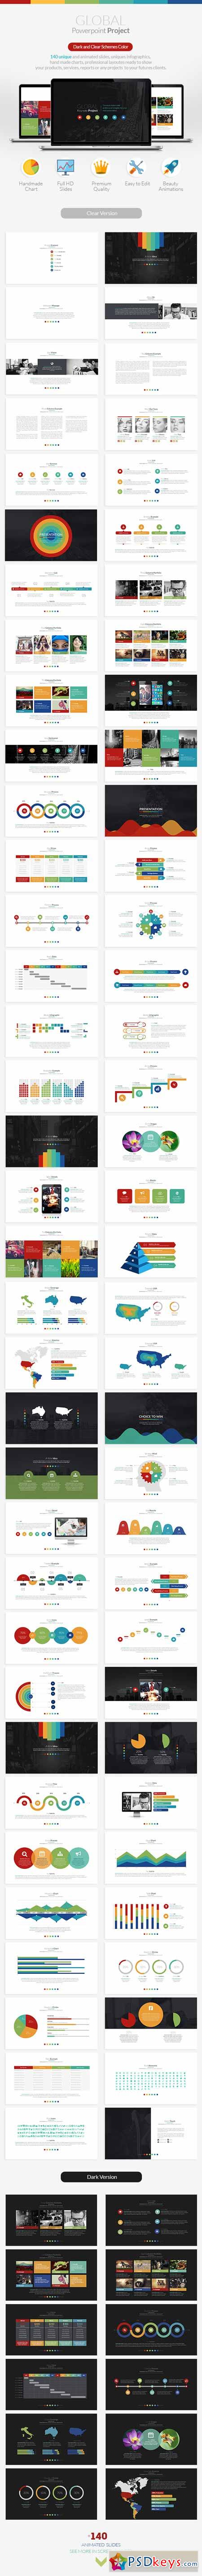 Global Project Powerpoint Presentation 9443402